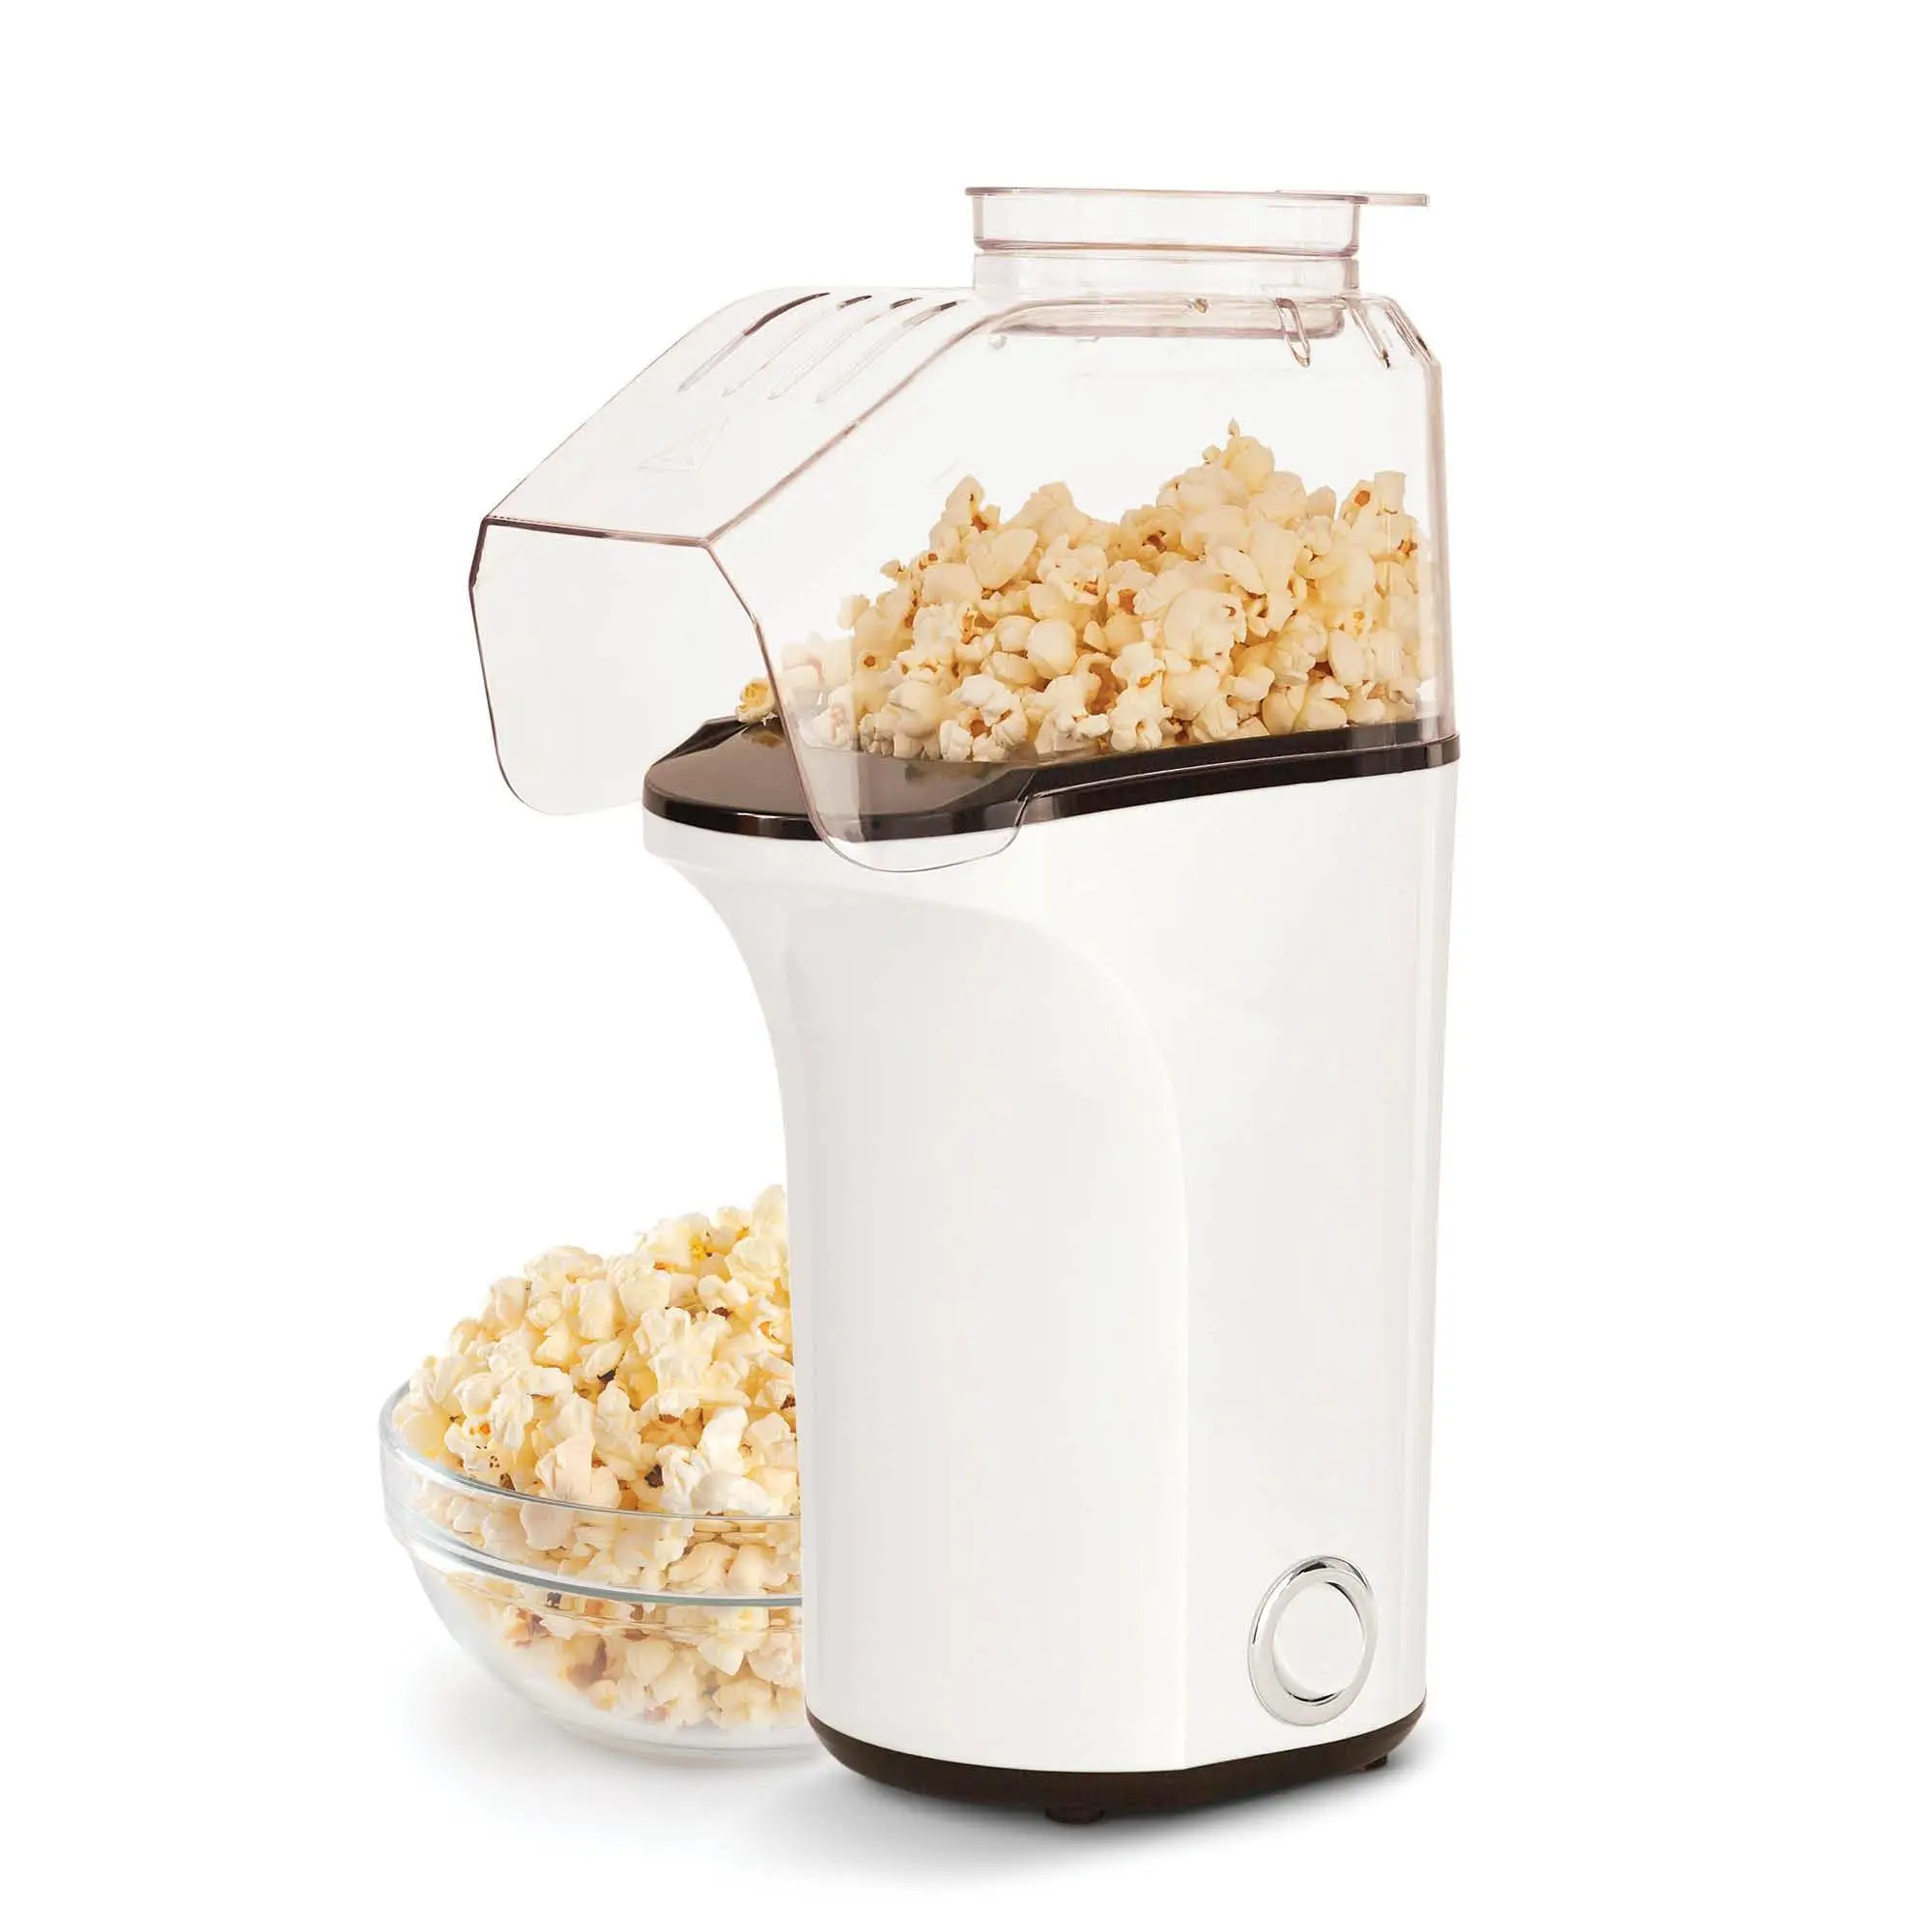 Electric Hot Oil cool handles popcorn maker for kids party